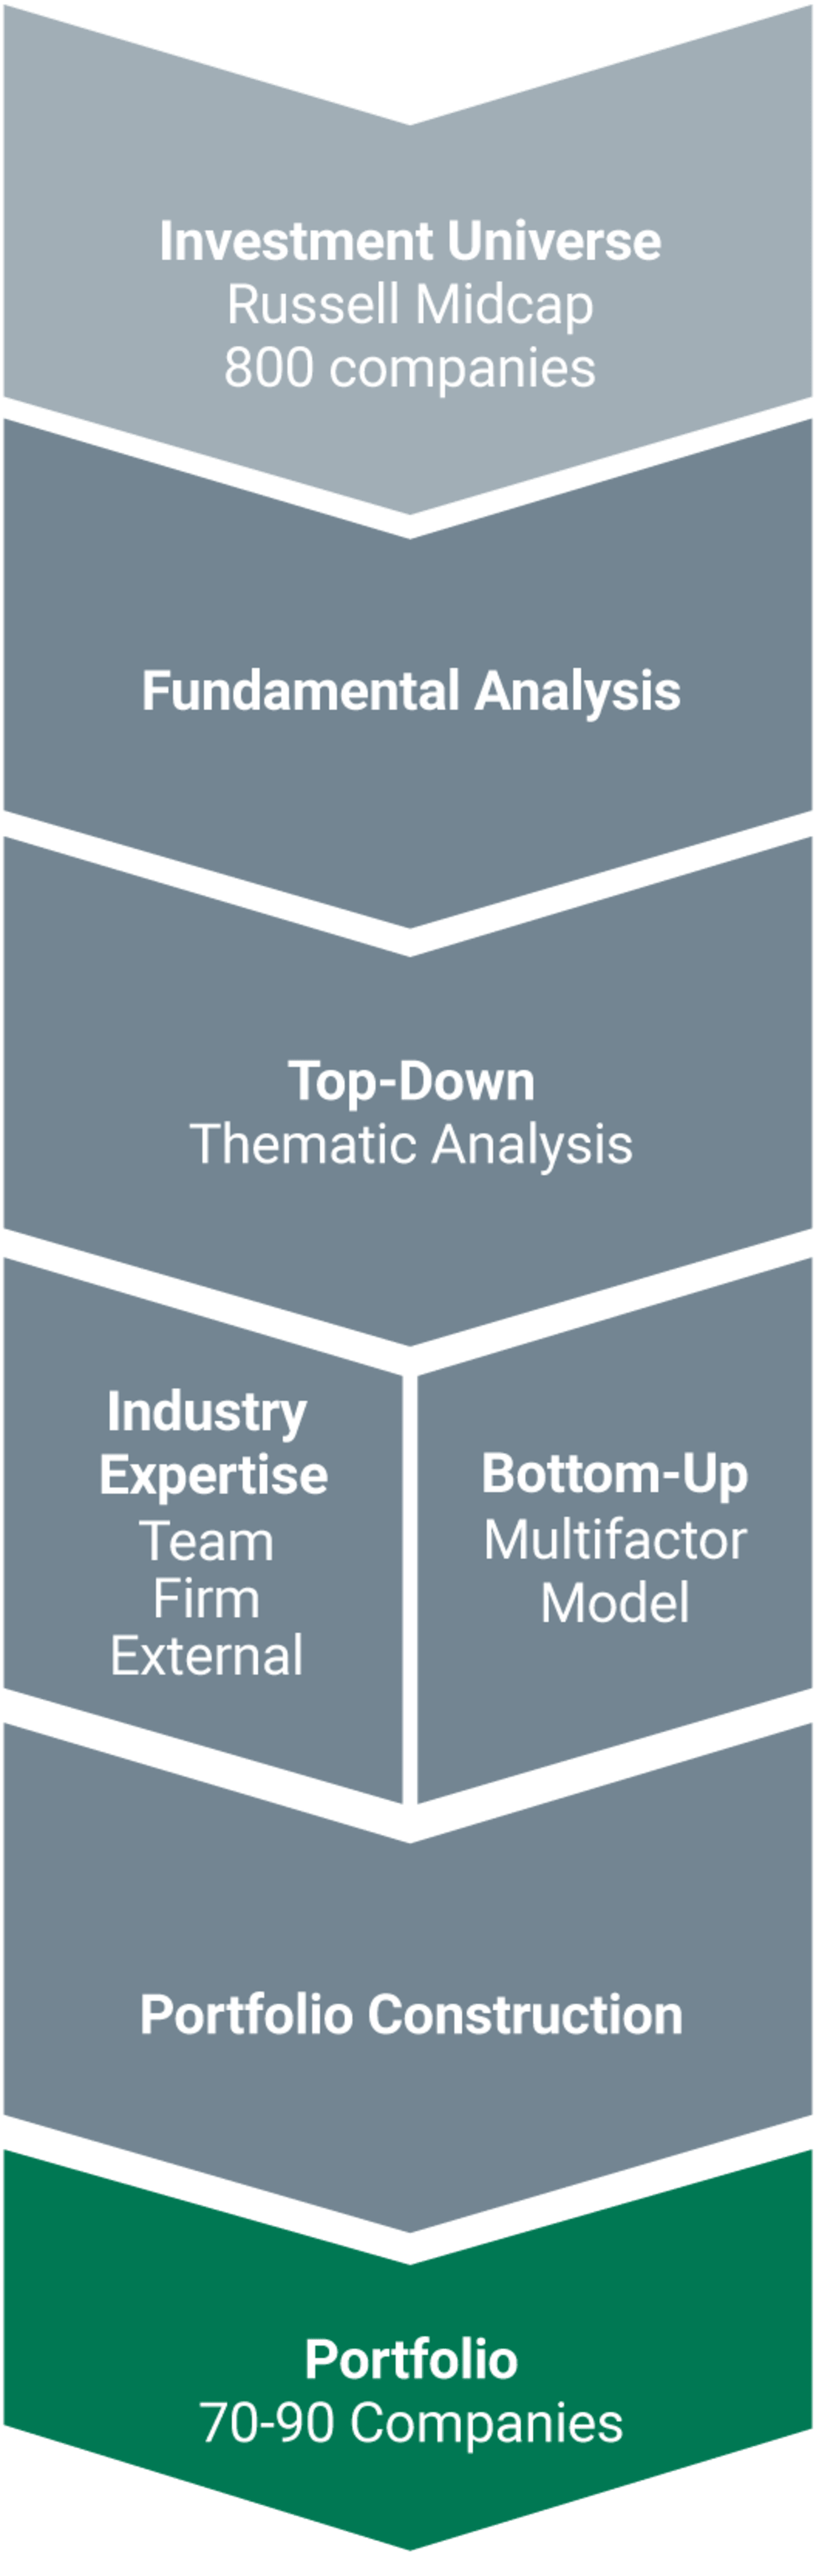 Investment Universe: Russell Midcap, 800 companies. Fundamental Analysis. Top-Down Thematic Analysis. Industry Expertise: Team, Firm, External. Bottom-Up: Multifactor Model. Portfolio Construction. Portfolio: 70 - 90 companies.